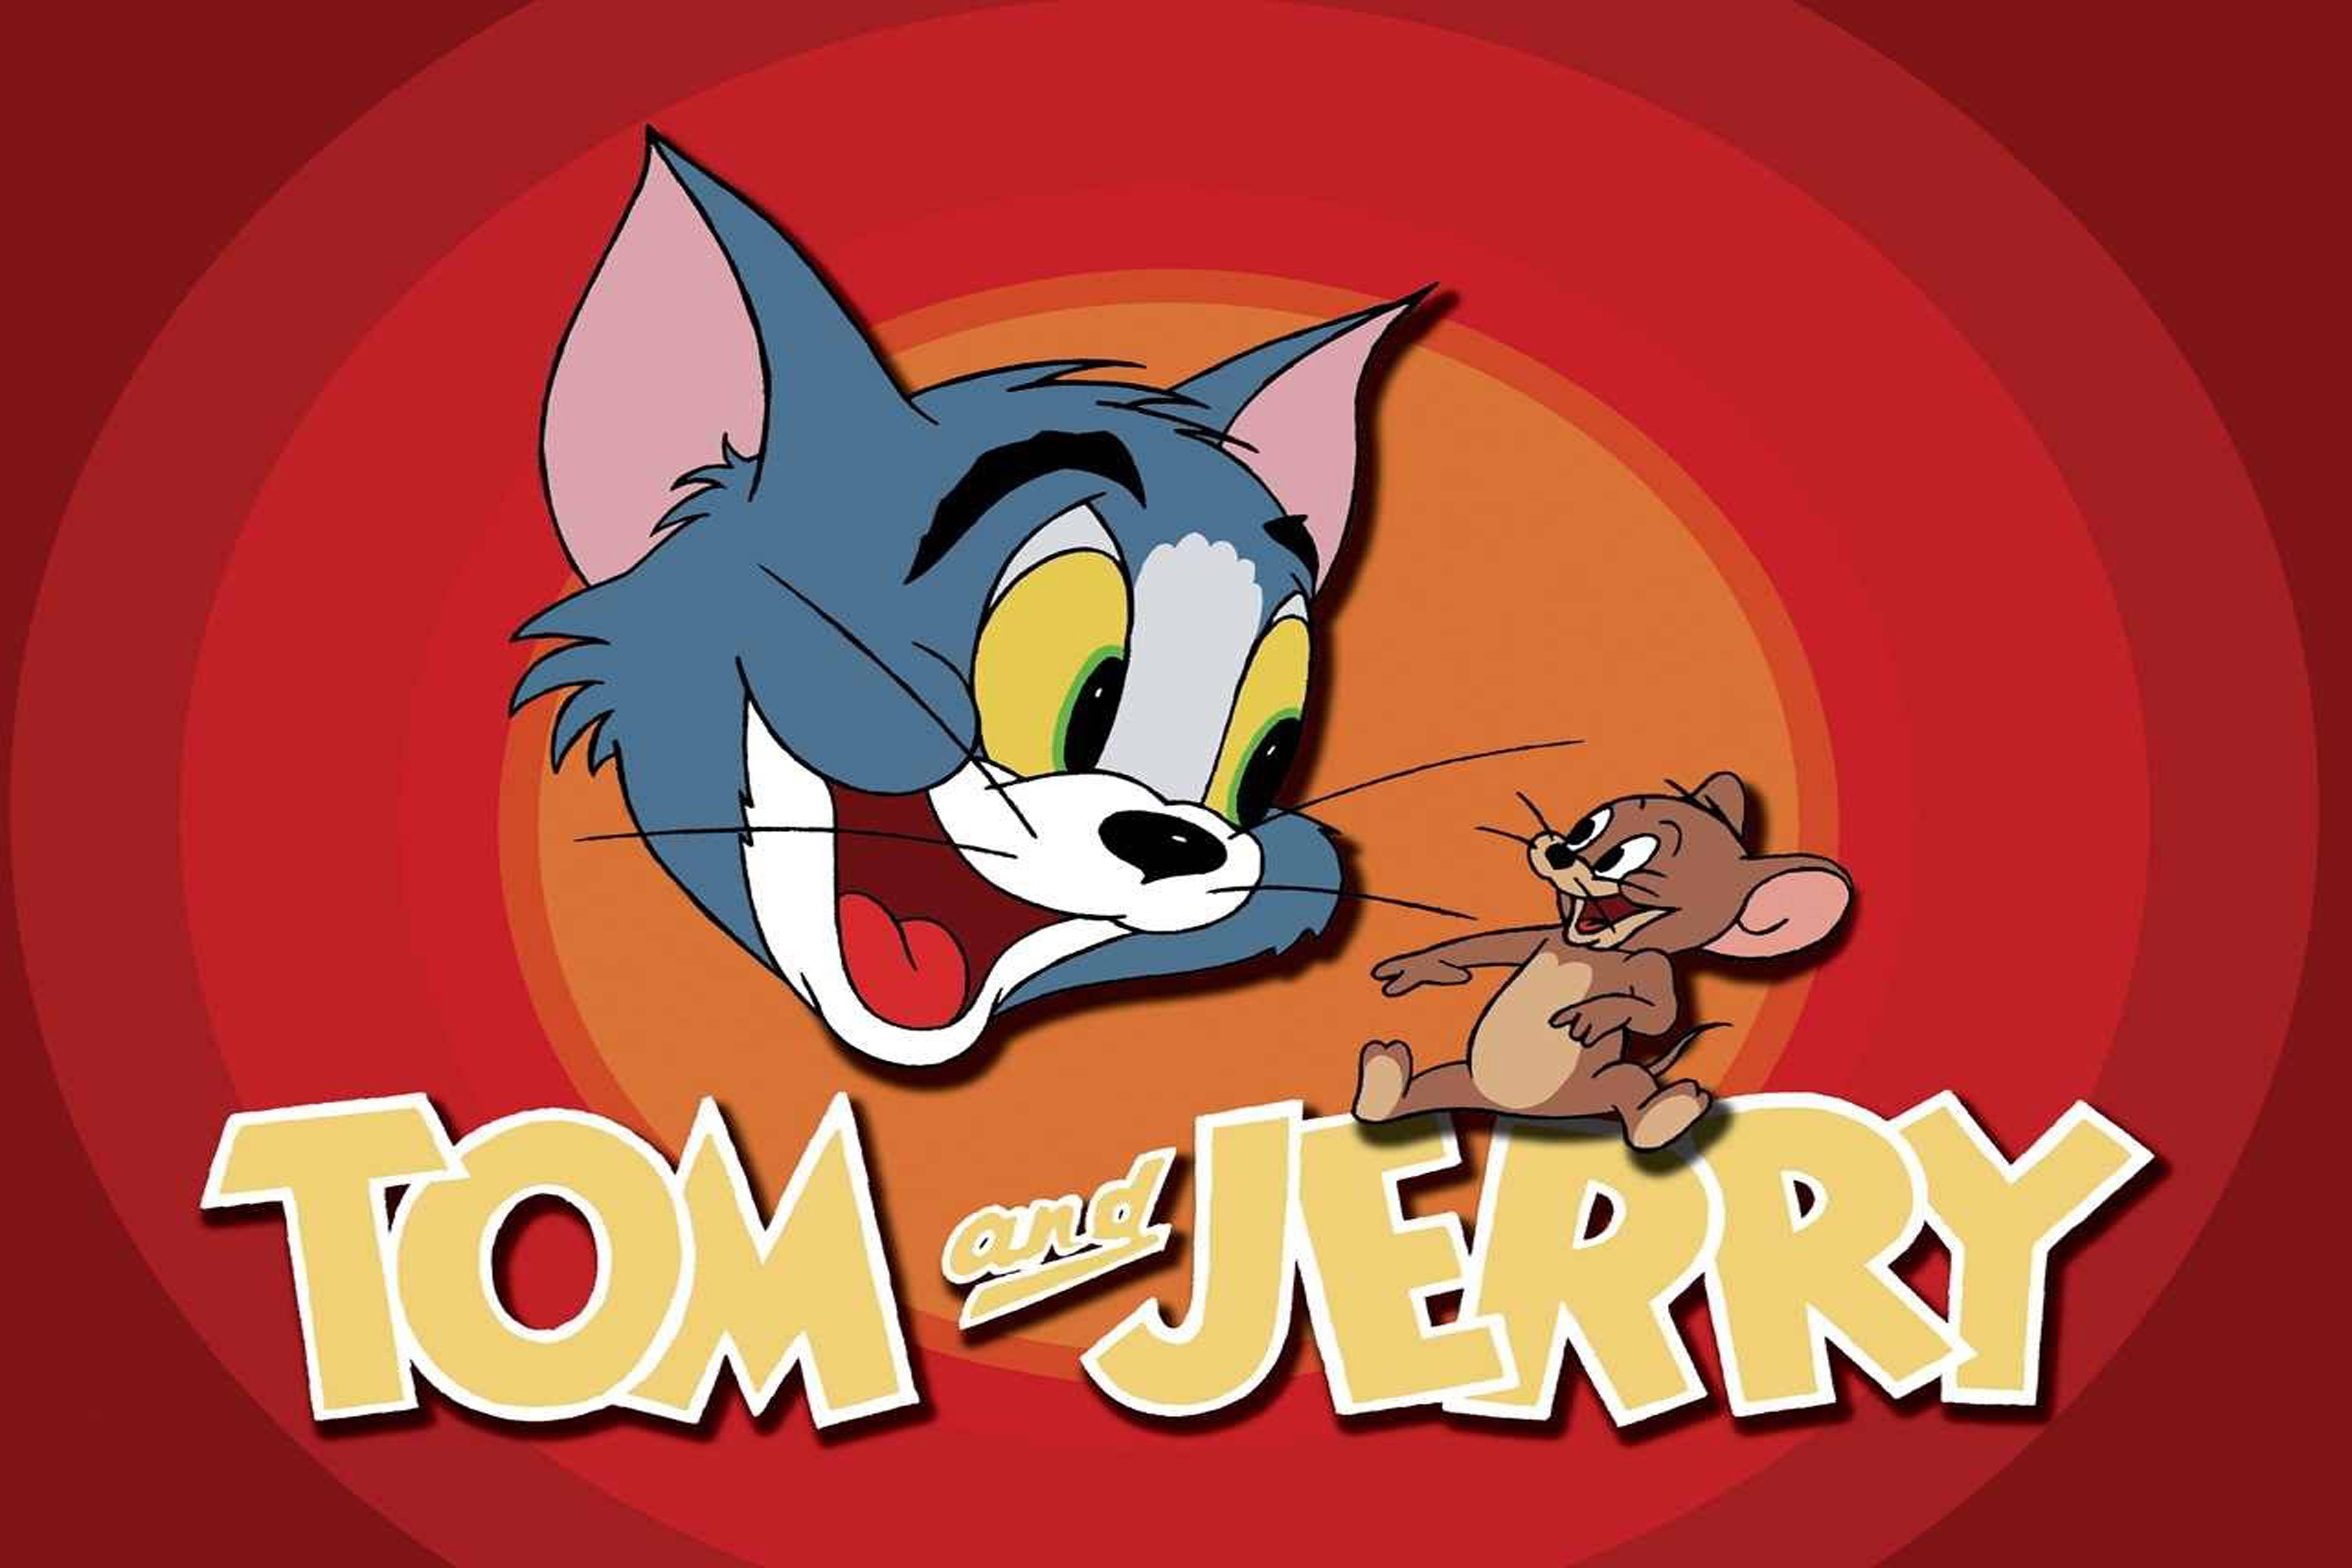 Buy Poster Tom and Jerry Cartoon 1009 Online @ ₹159 from ShopClues